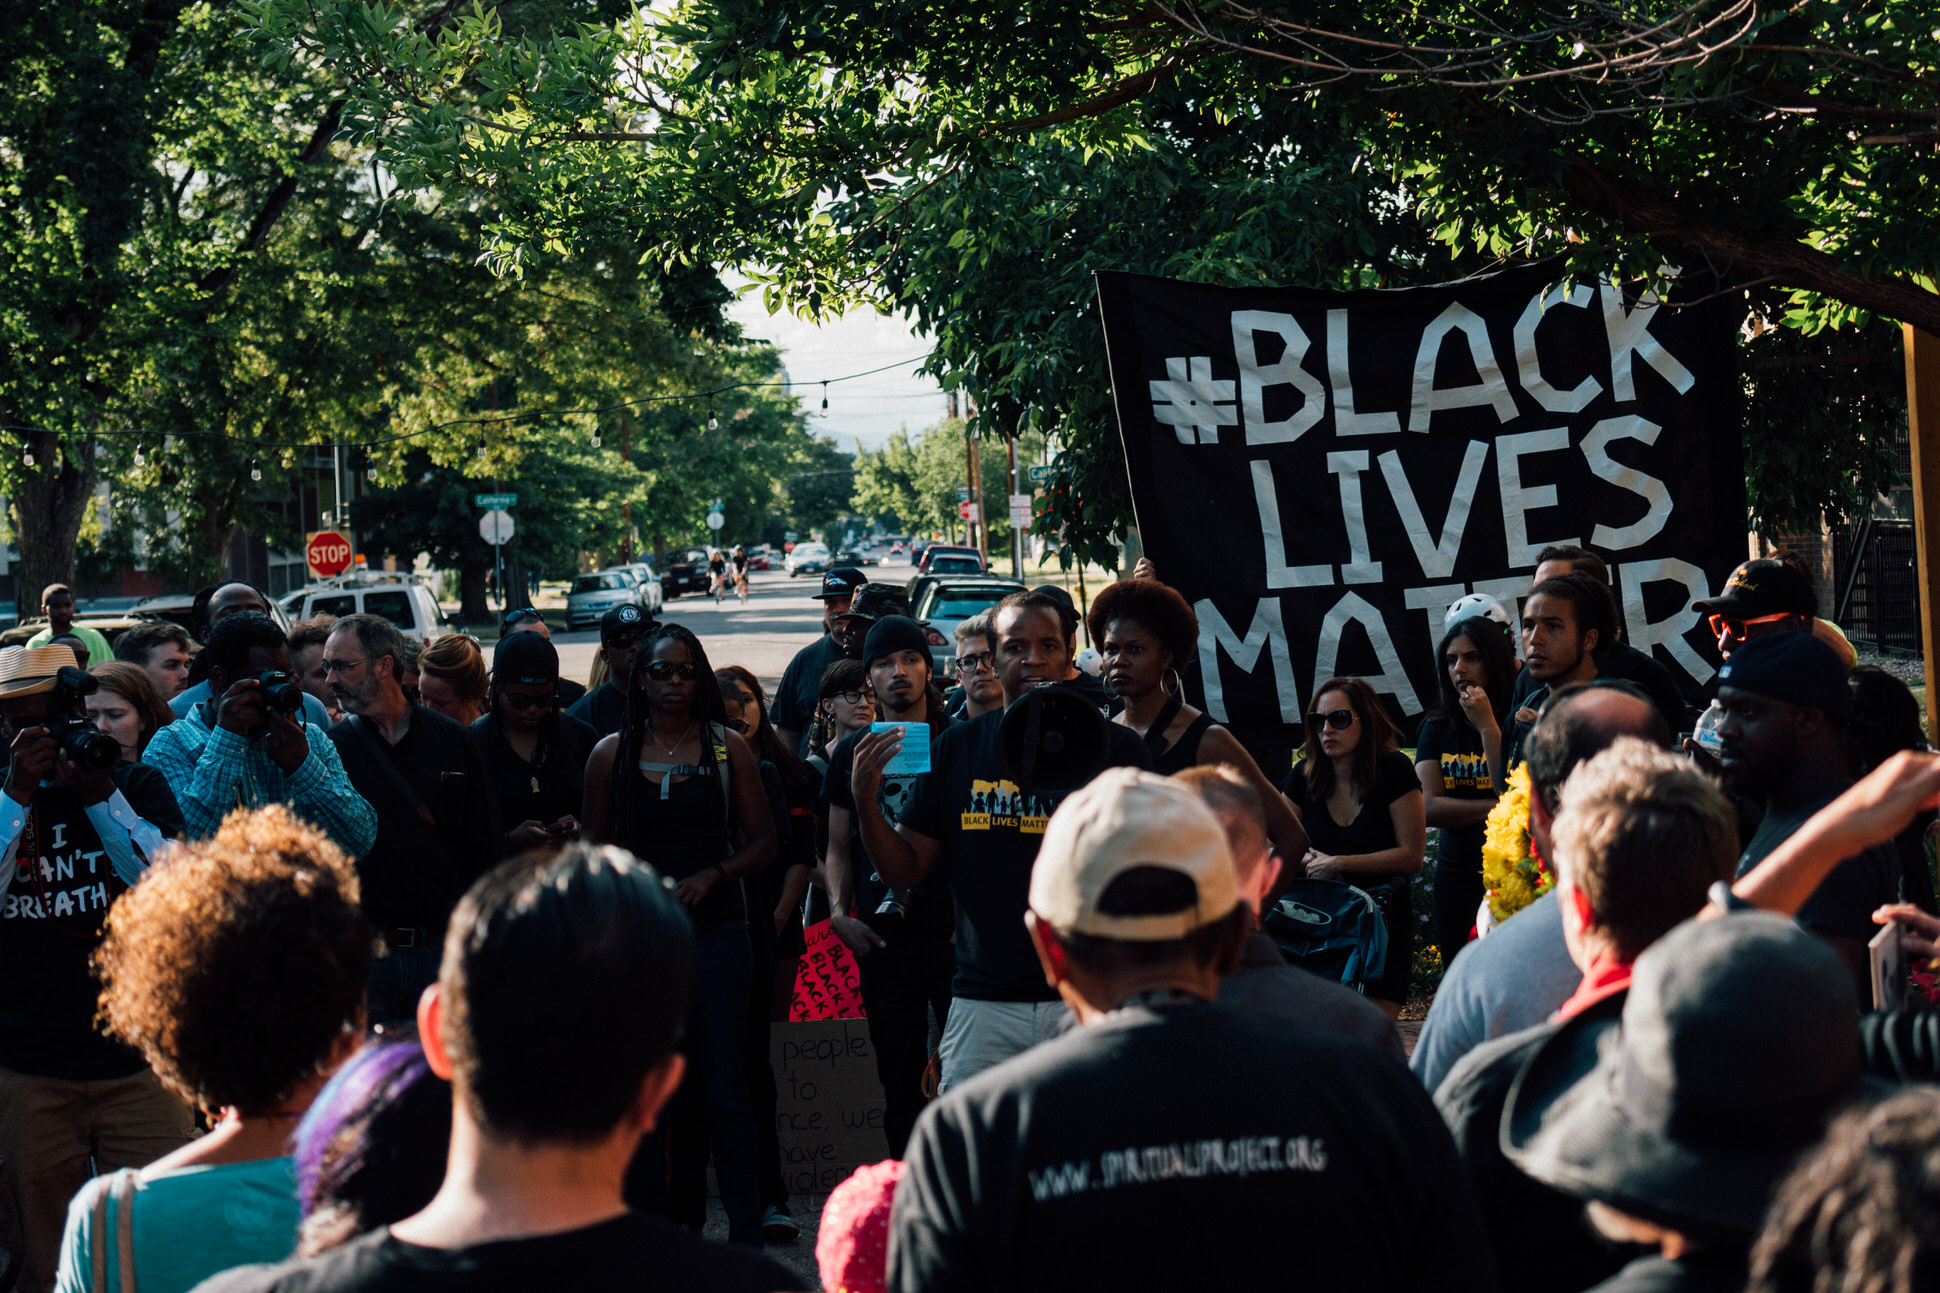 Participants of the Black Lives Matter 5280 march gather at Lawson's Park in the historic Five Points Community before proceeding downtown.